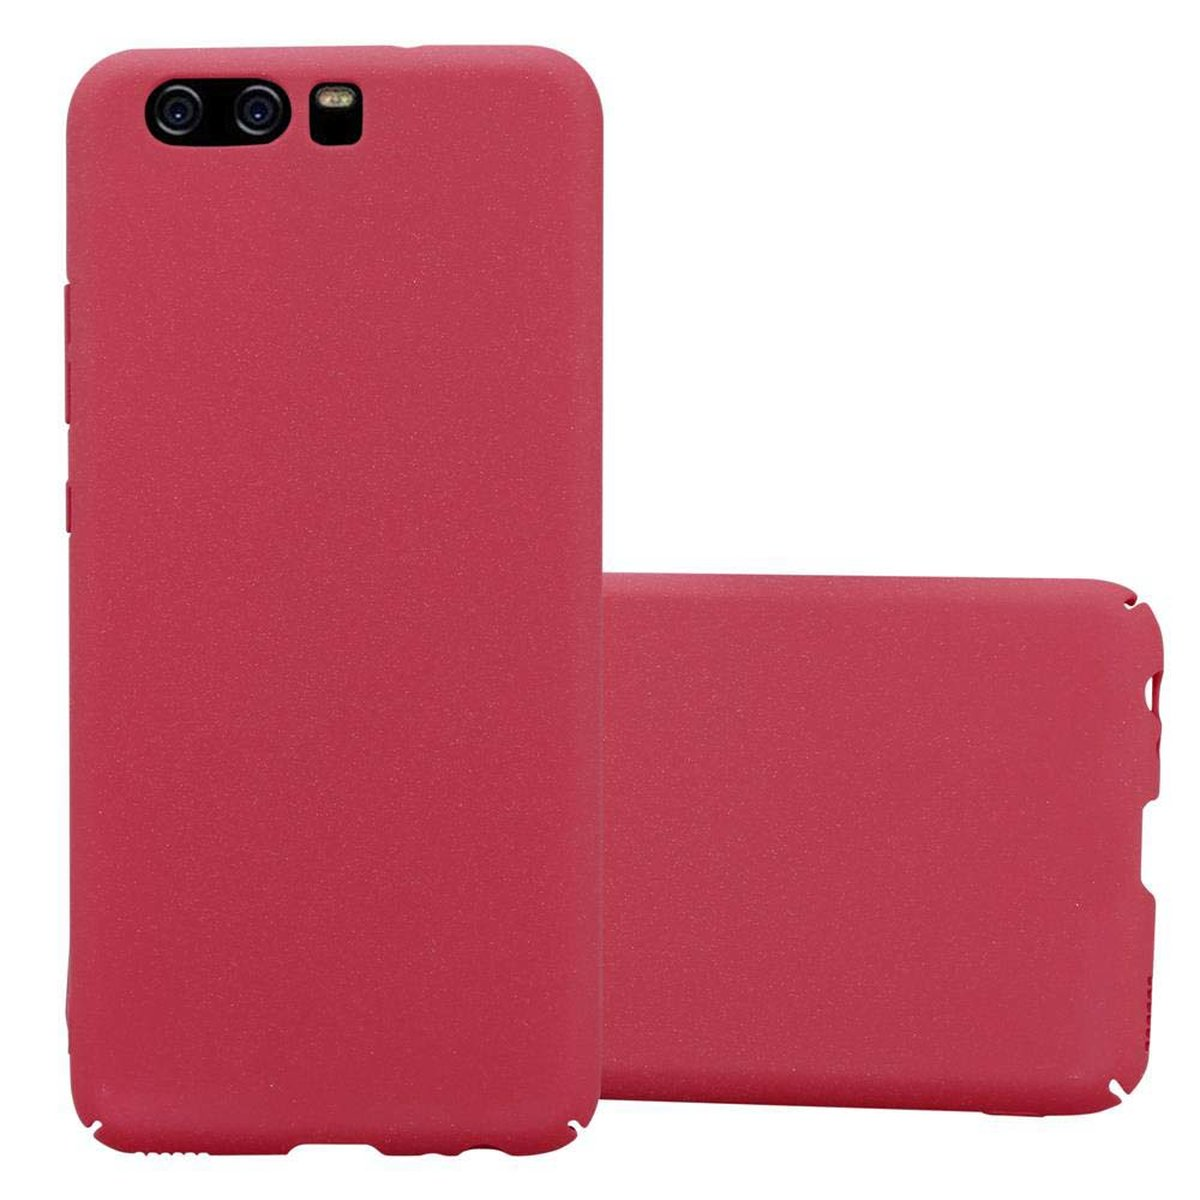 Backcover, Huawei, im ROT FROSTY P10, CADORABO Hard Frosty Hülle Style, Case